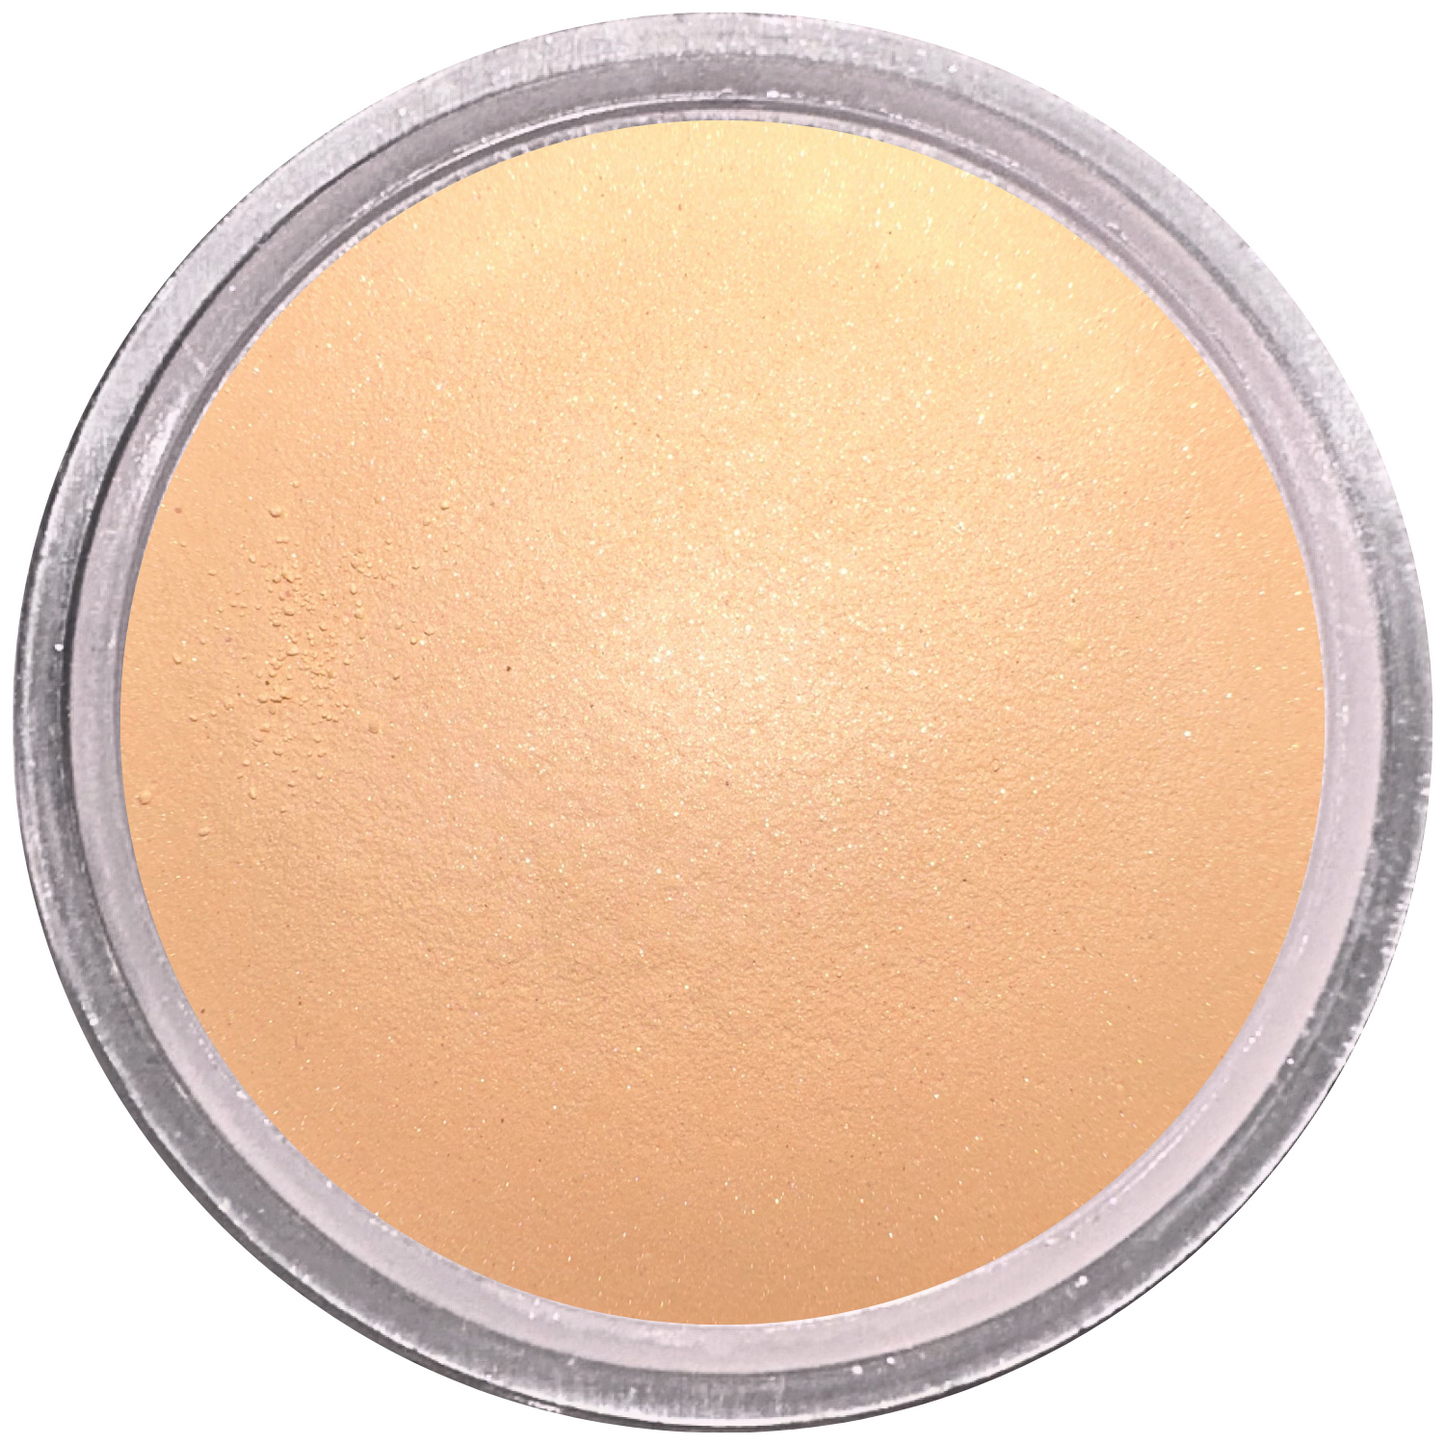 Flawless Mineral Face Powder